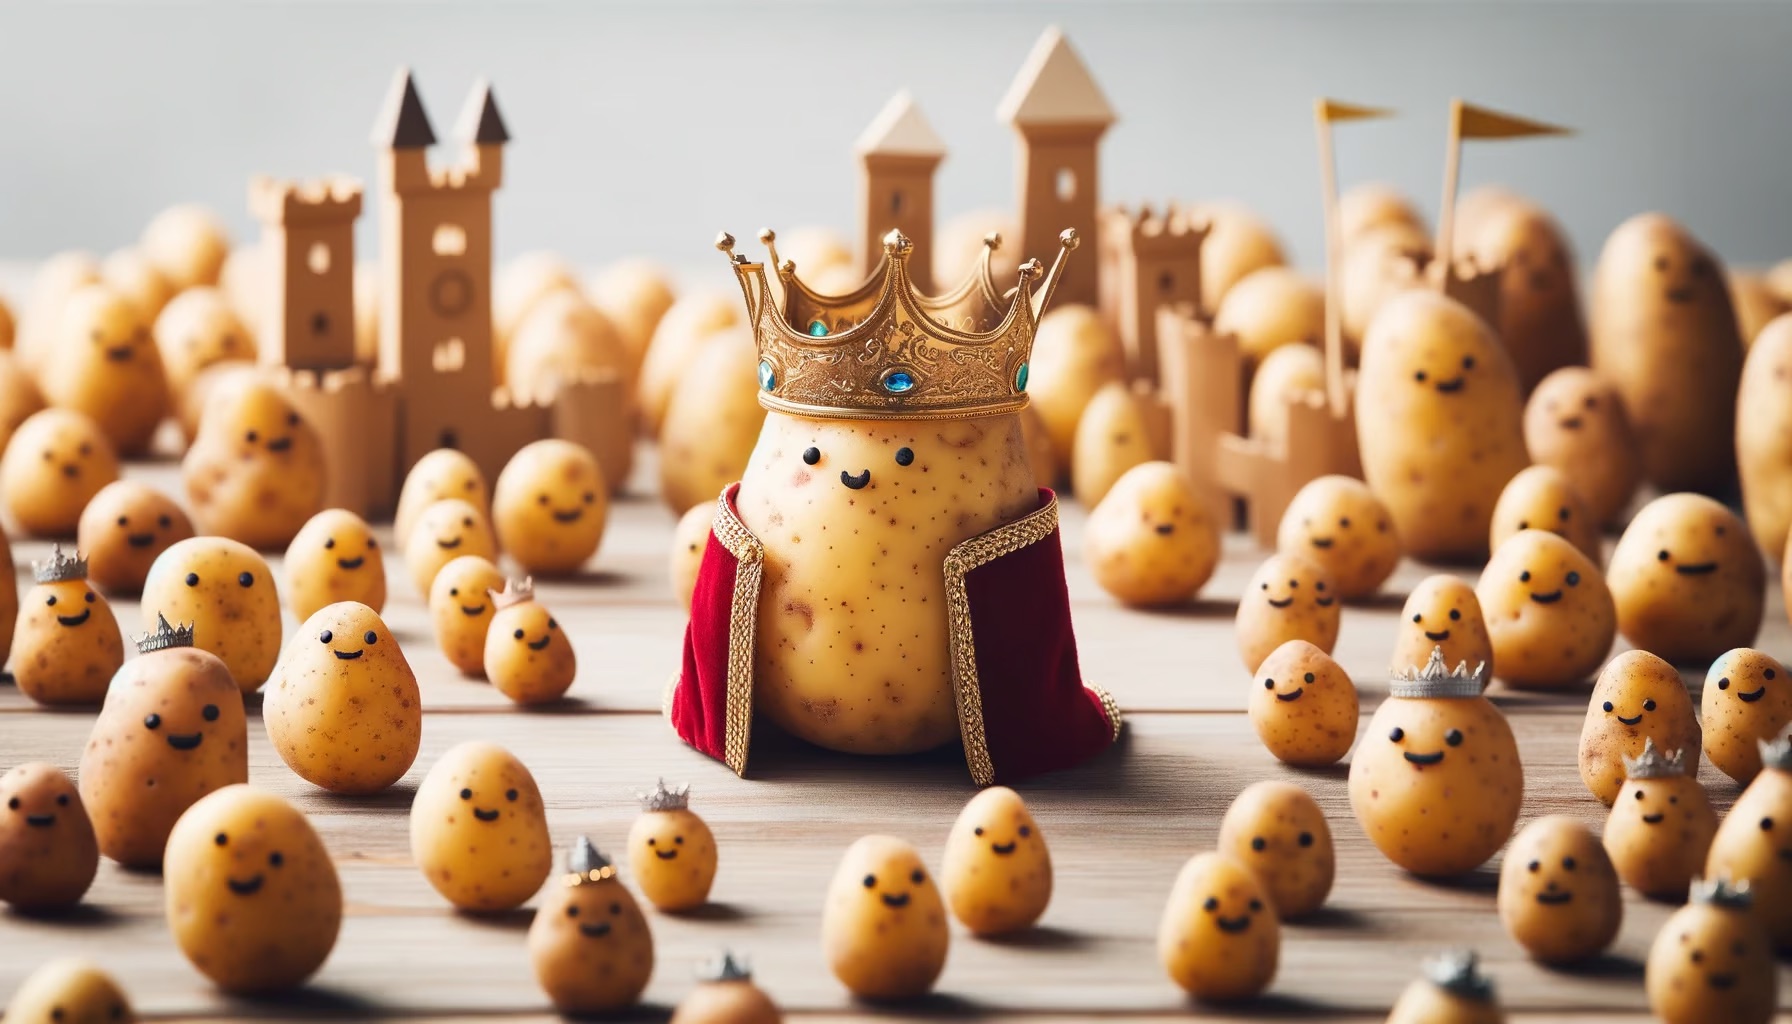 Dall-e 3: Tiny potato kings wearing majestic crowns, sitting on thrones, overseeing their vast potato kingdom filled with potato subjects and potato castles.